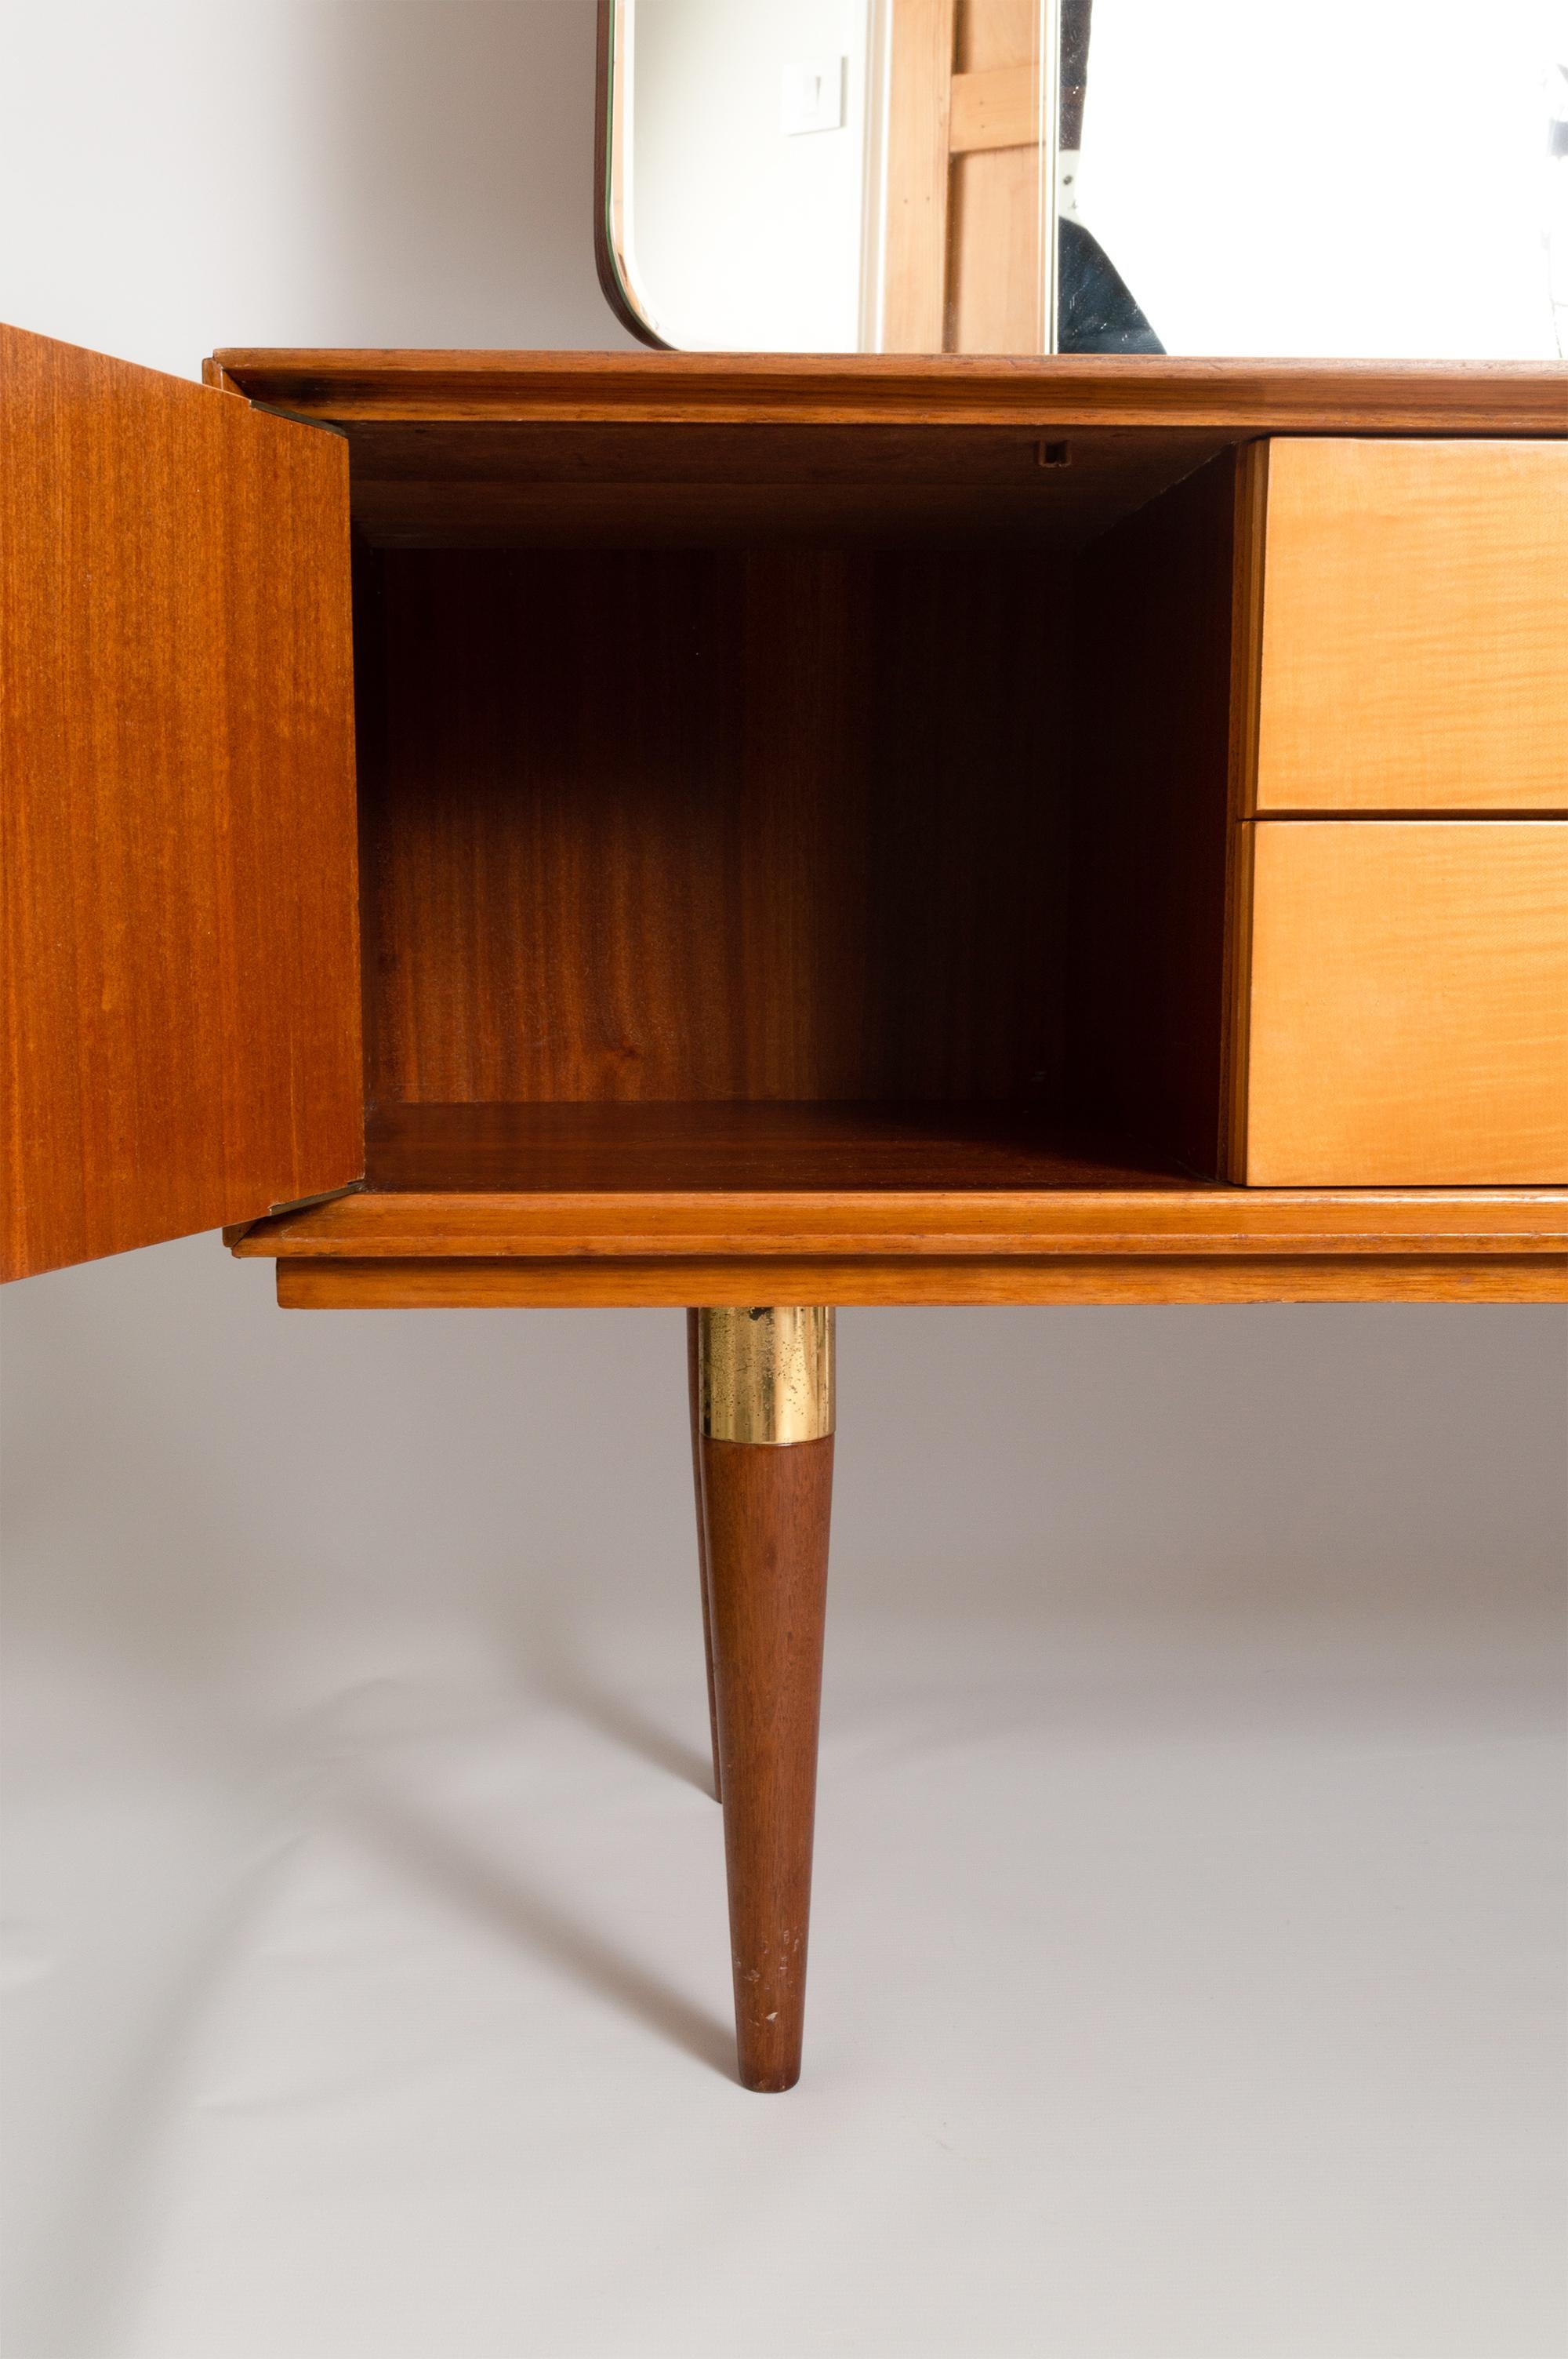 Lacquered Midcentury Mirrored Dressing Table in Sycamore and Walnut, France, circa 1950 For Sale